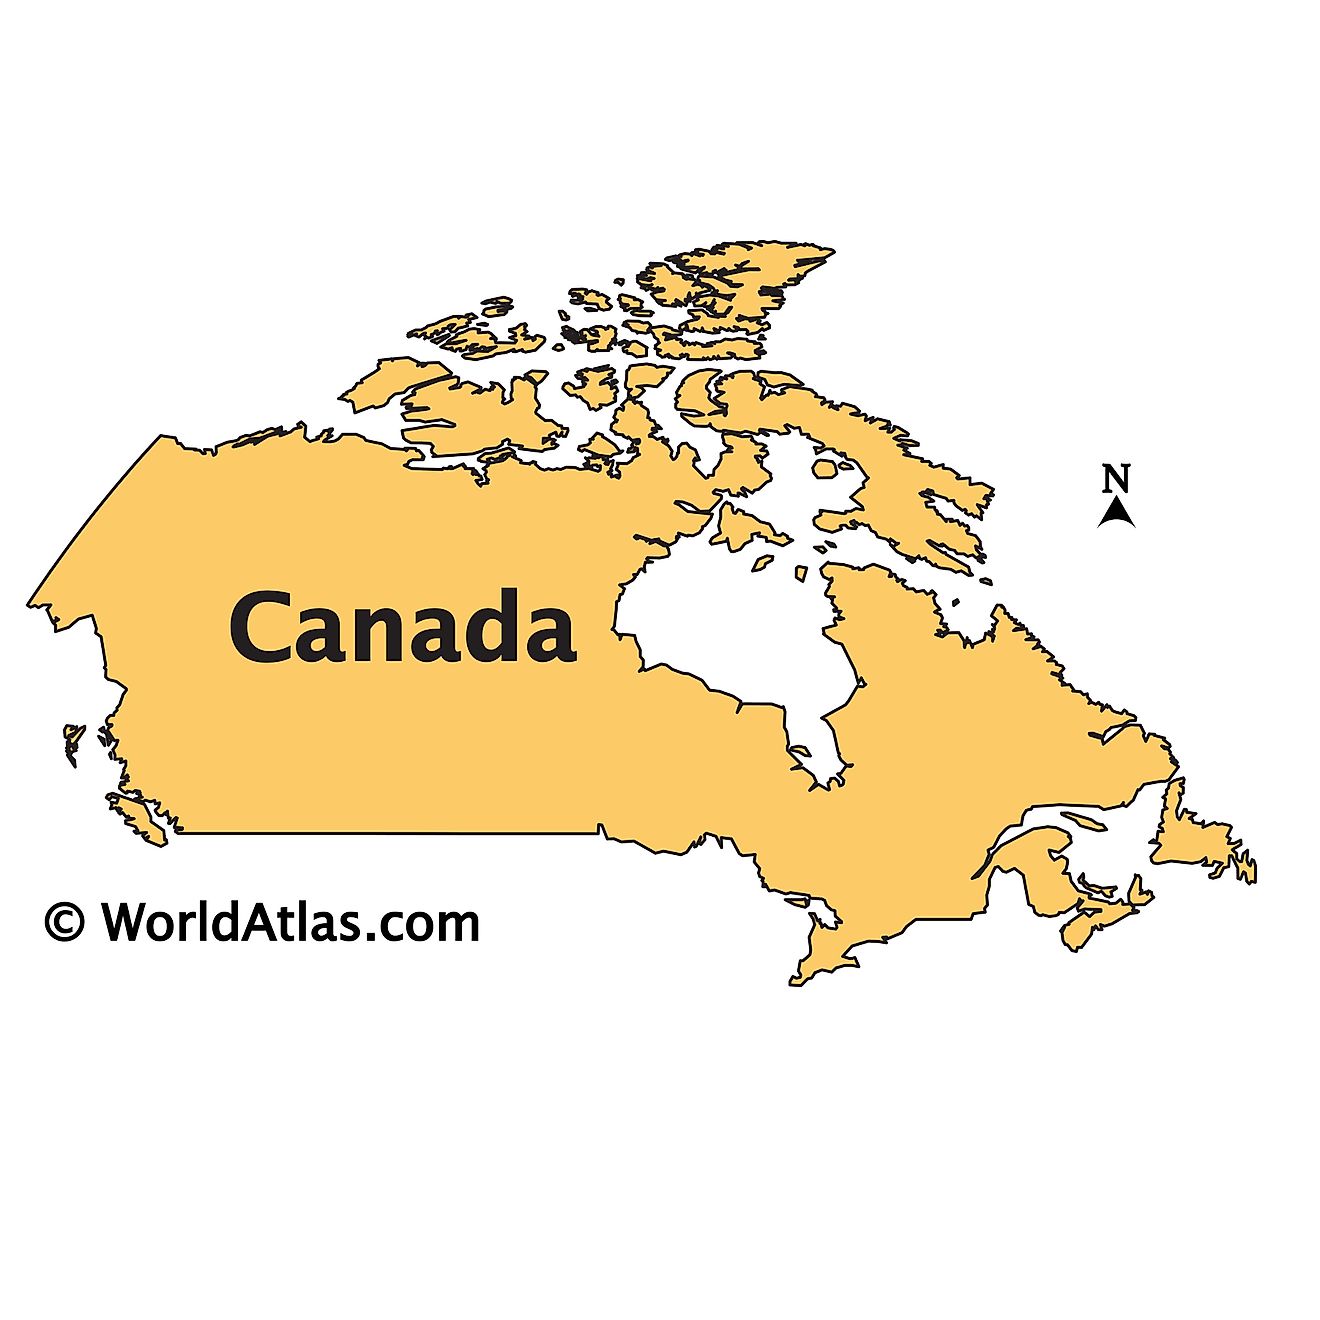 Blank Physical Map Of Canada